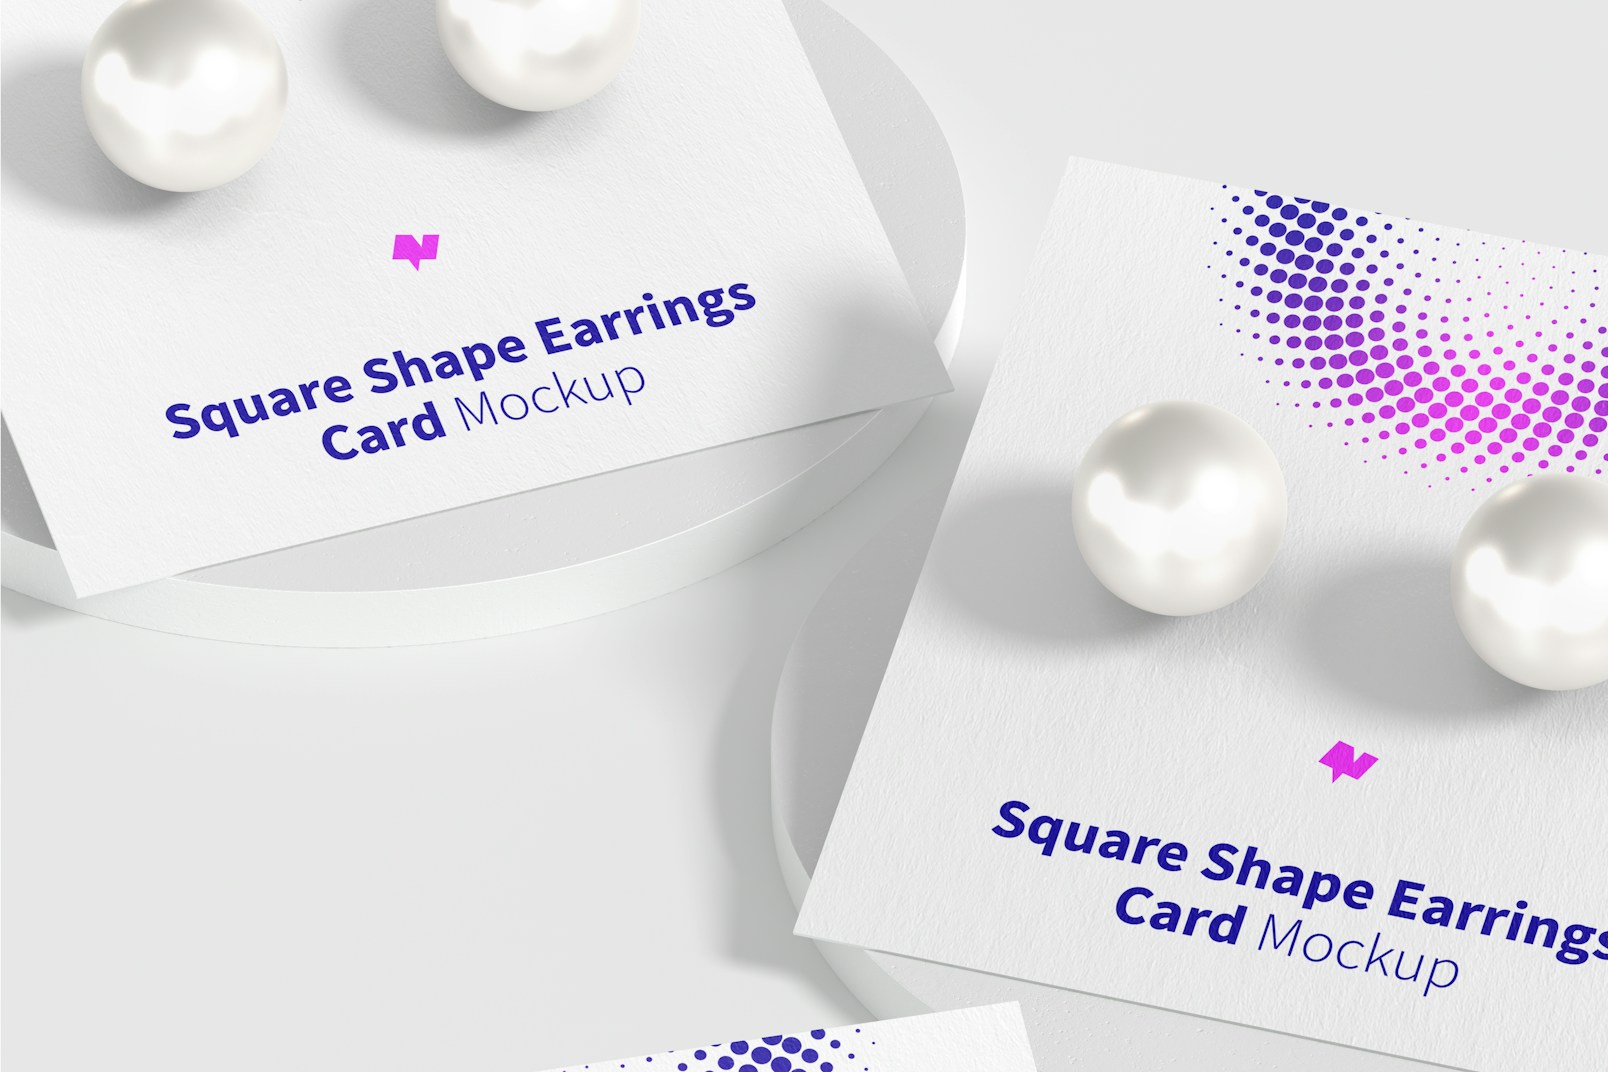 Square Shape Earrings Cards Mockup, Perspective